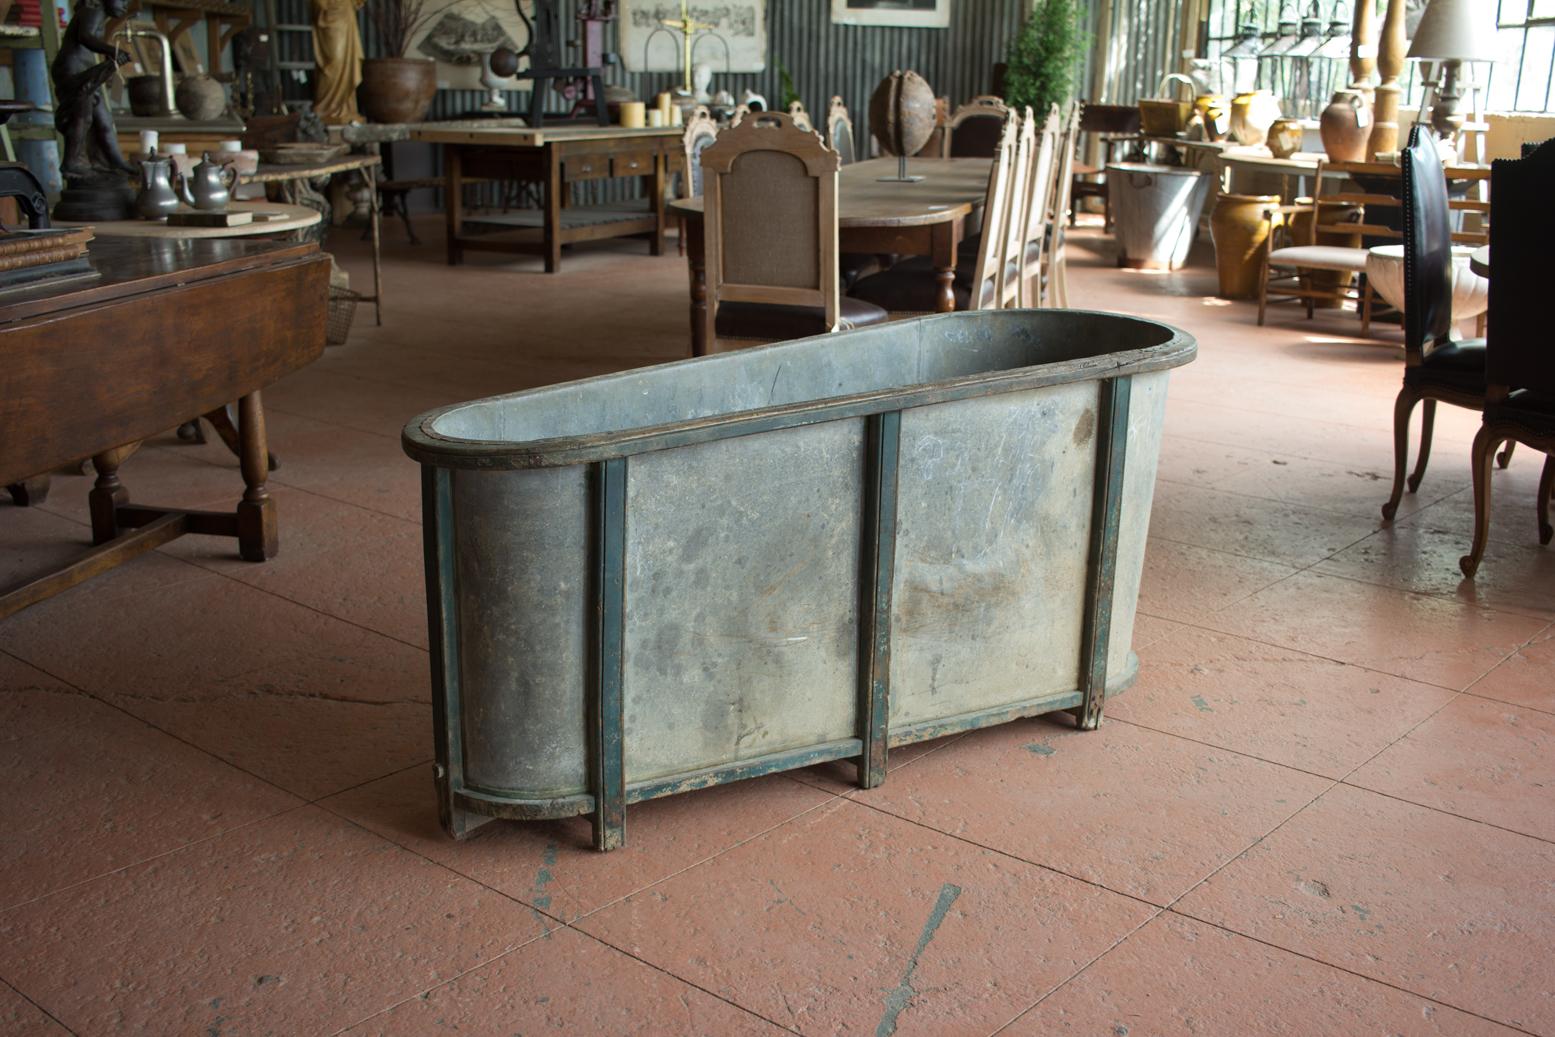 Antique English oak and zinc bathtub with a wonderful patina. Would make a stunning planter or beer/wine bucket!